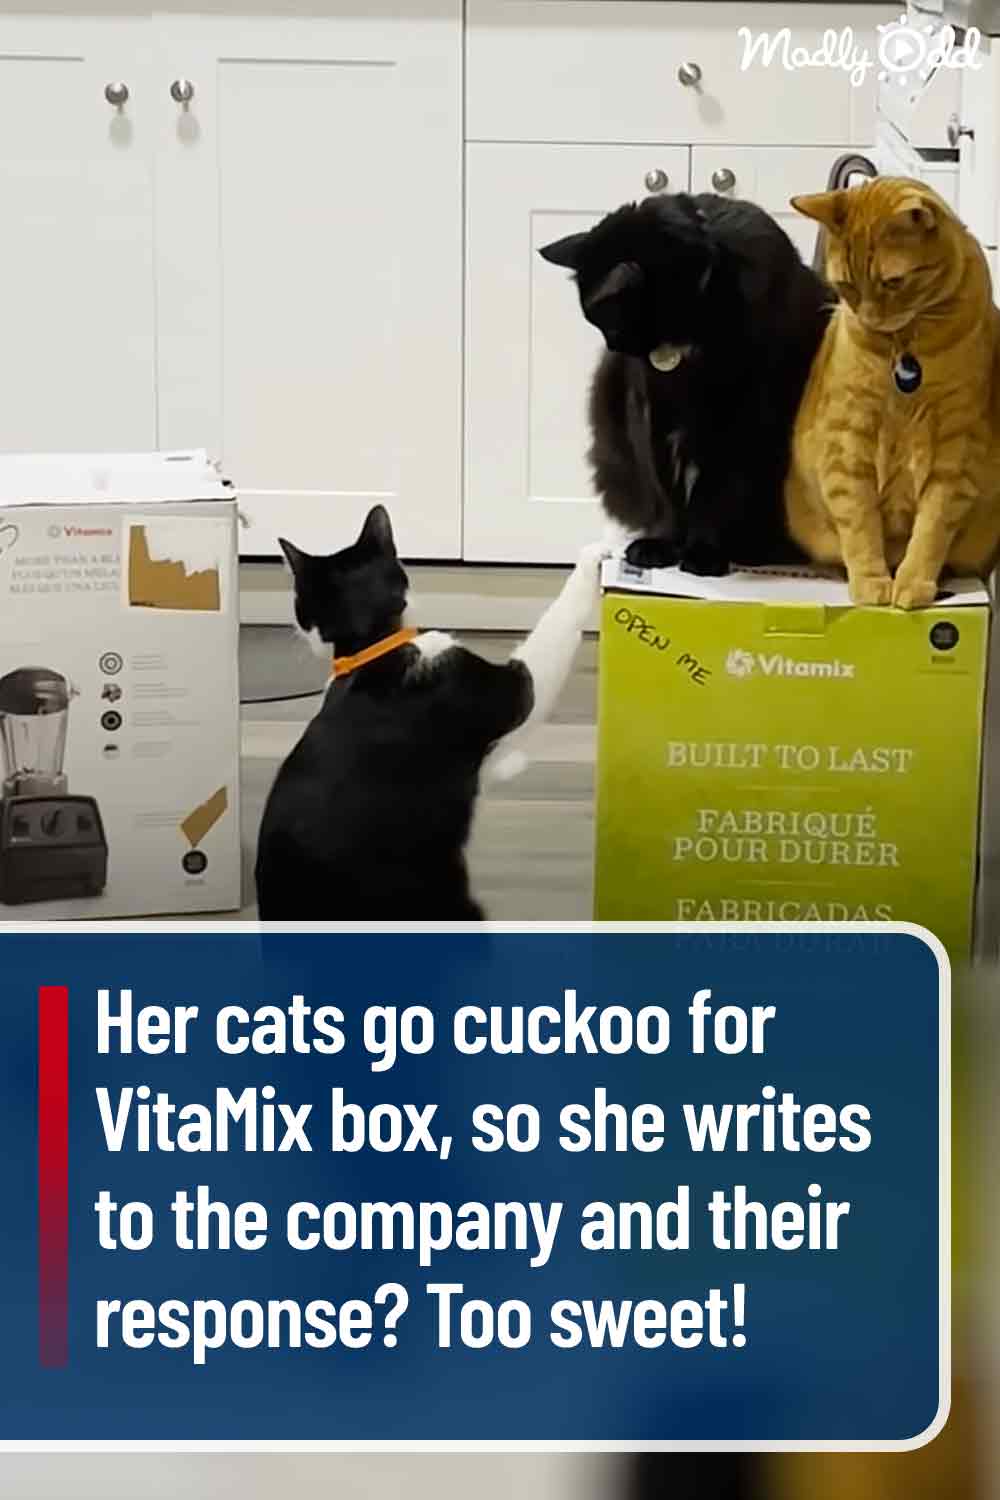 Her cats go cuckoo for VitaMix box, so she writes to the company and their response? Too sweet!